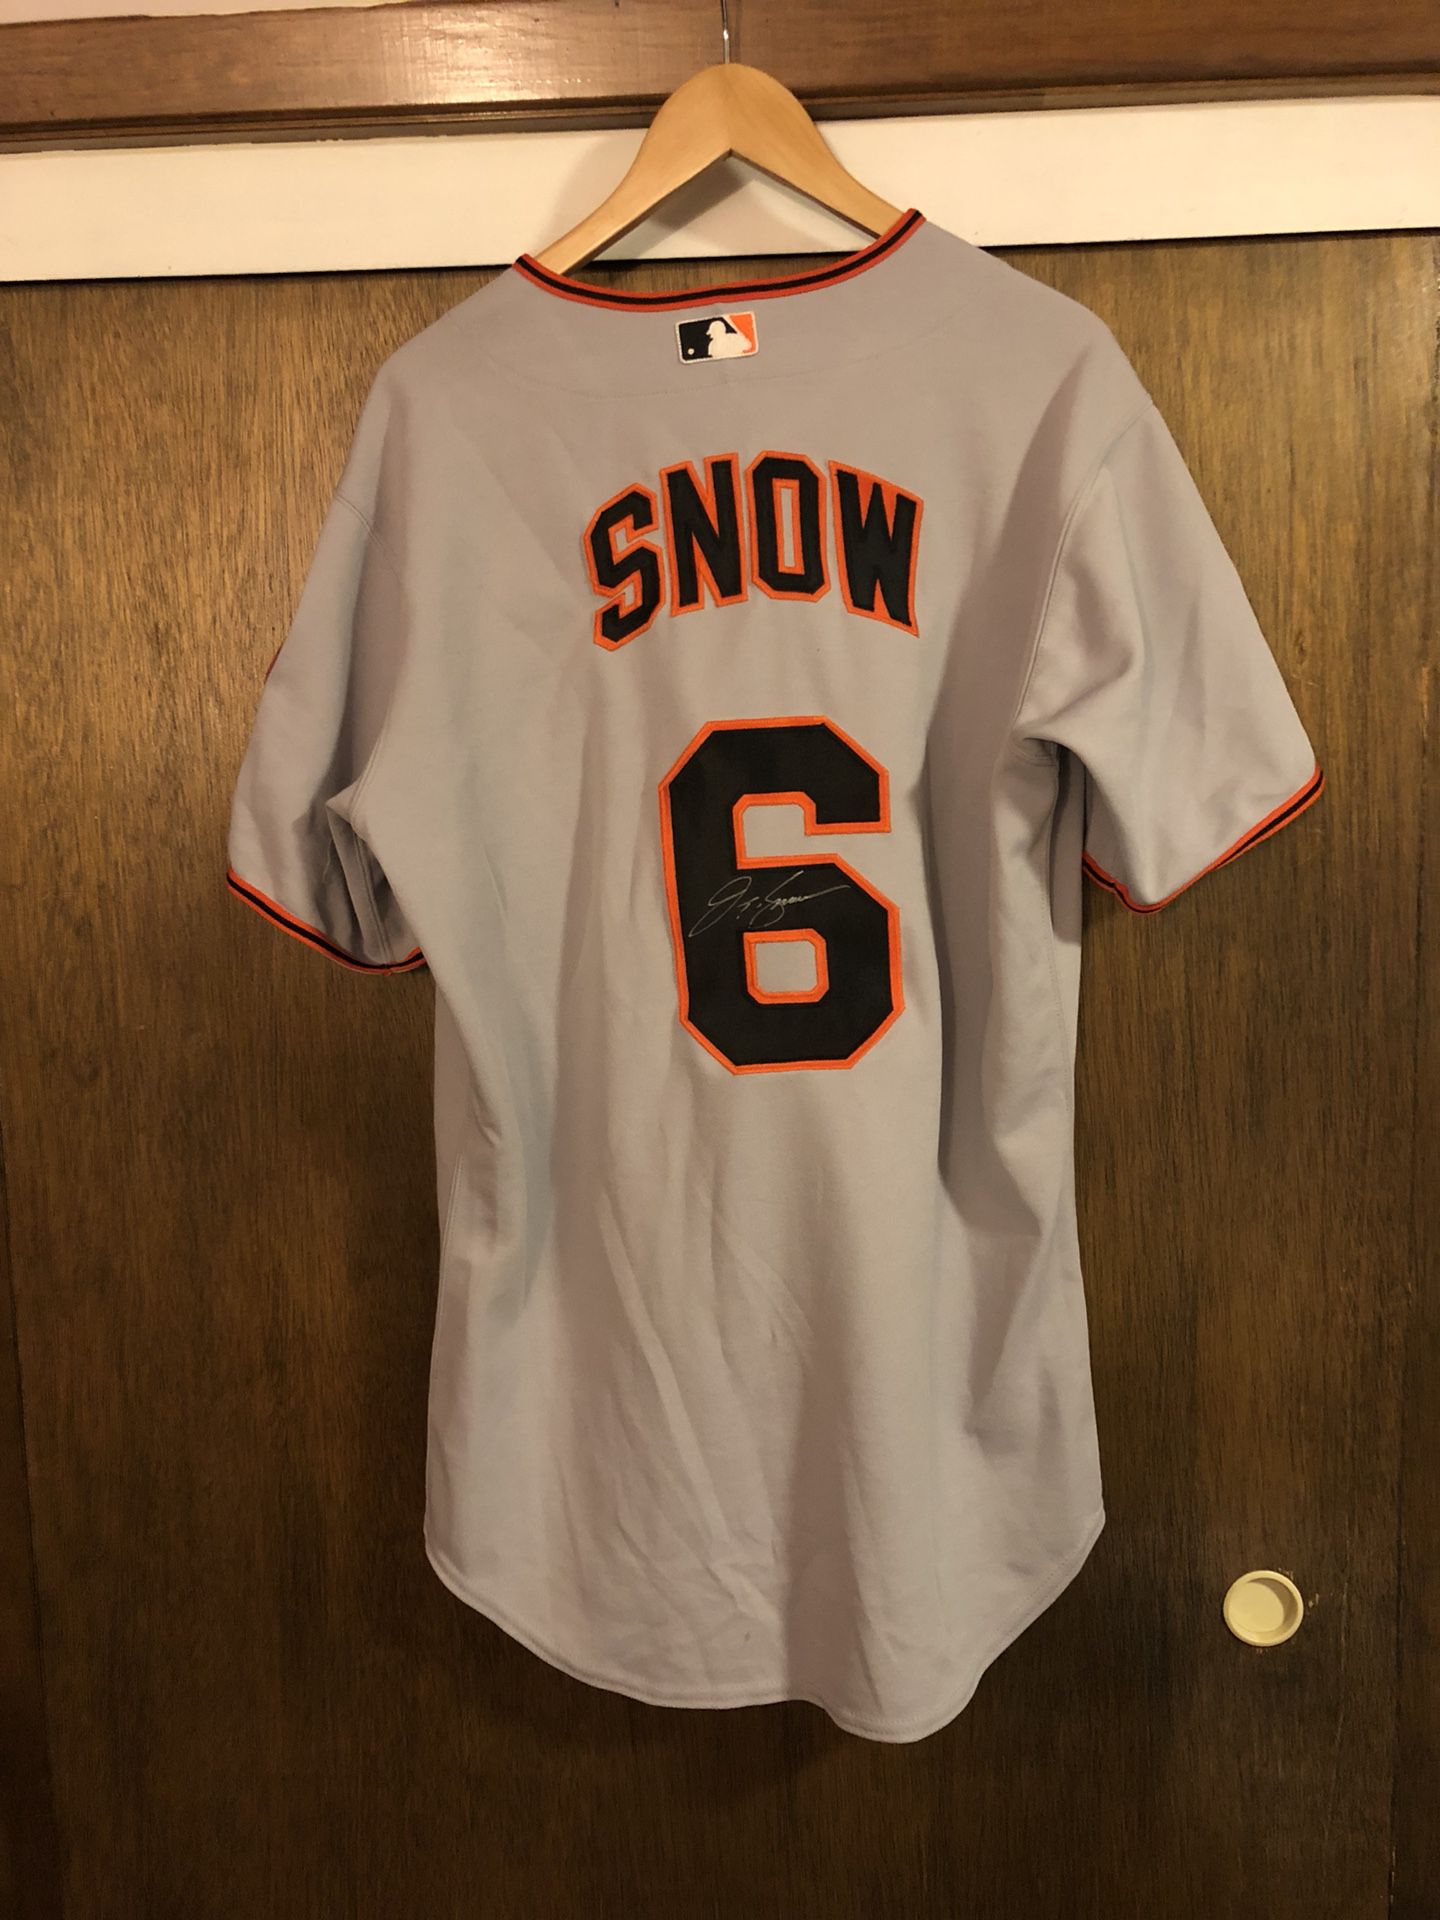 San Francisco Giants baseball jersey signed by JT Snow for Sale in